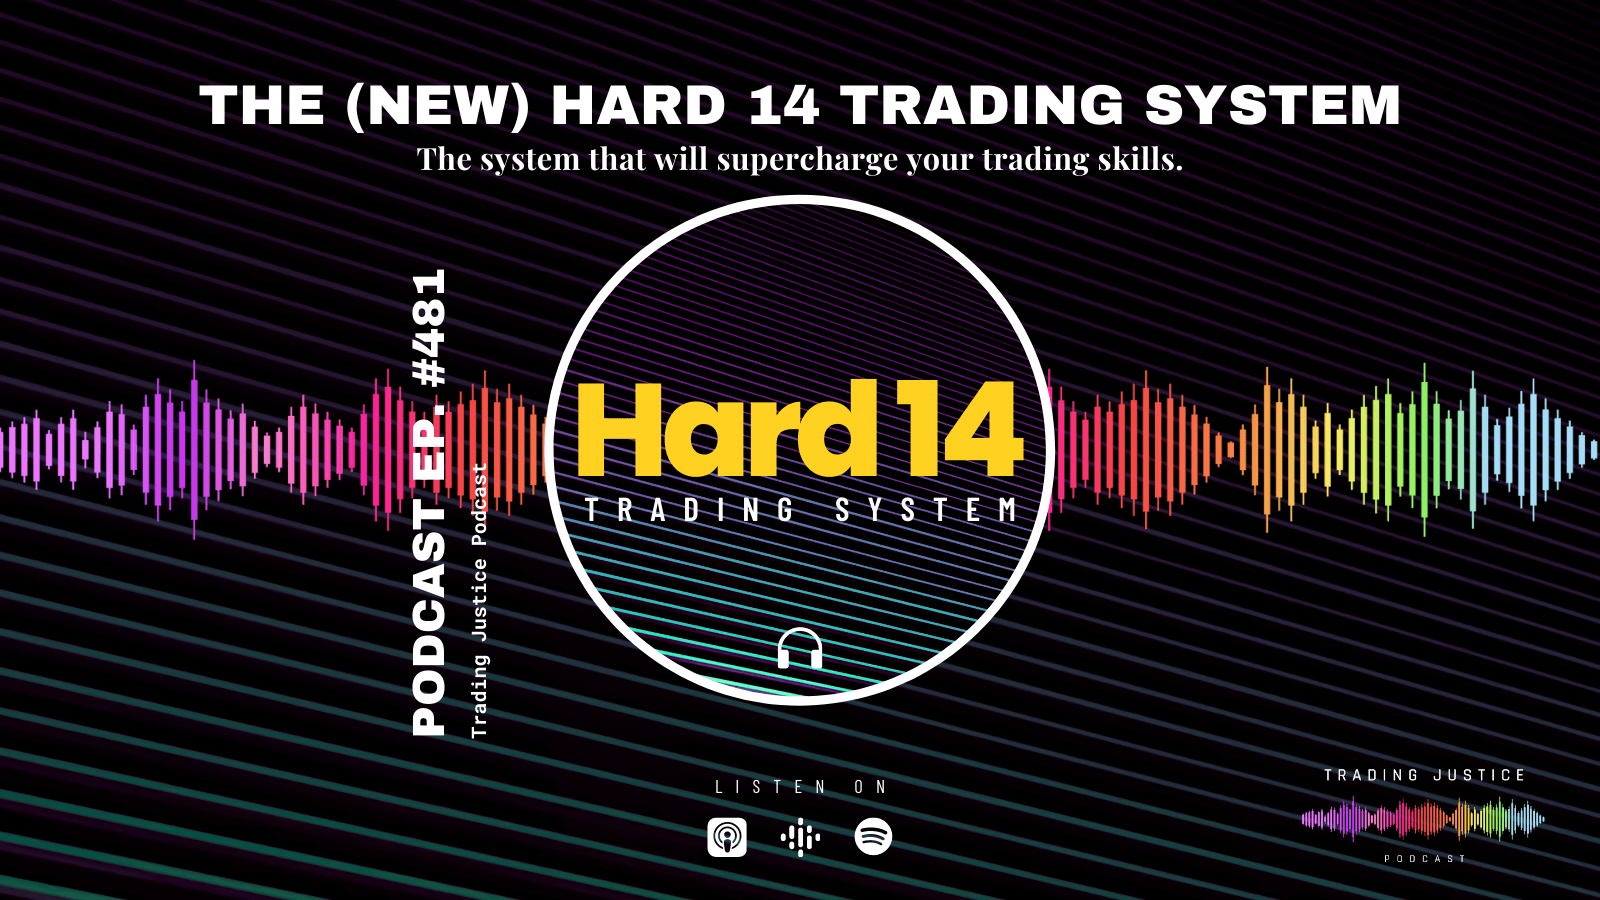 Trading Justice 481: Hard 14 Trading System Release